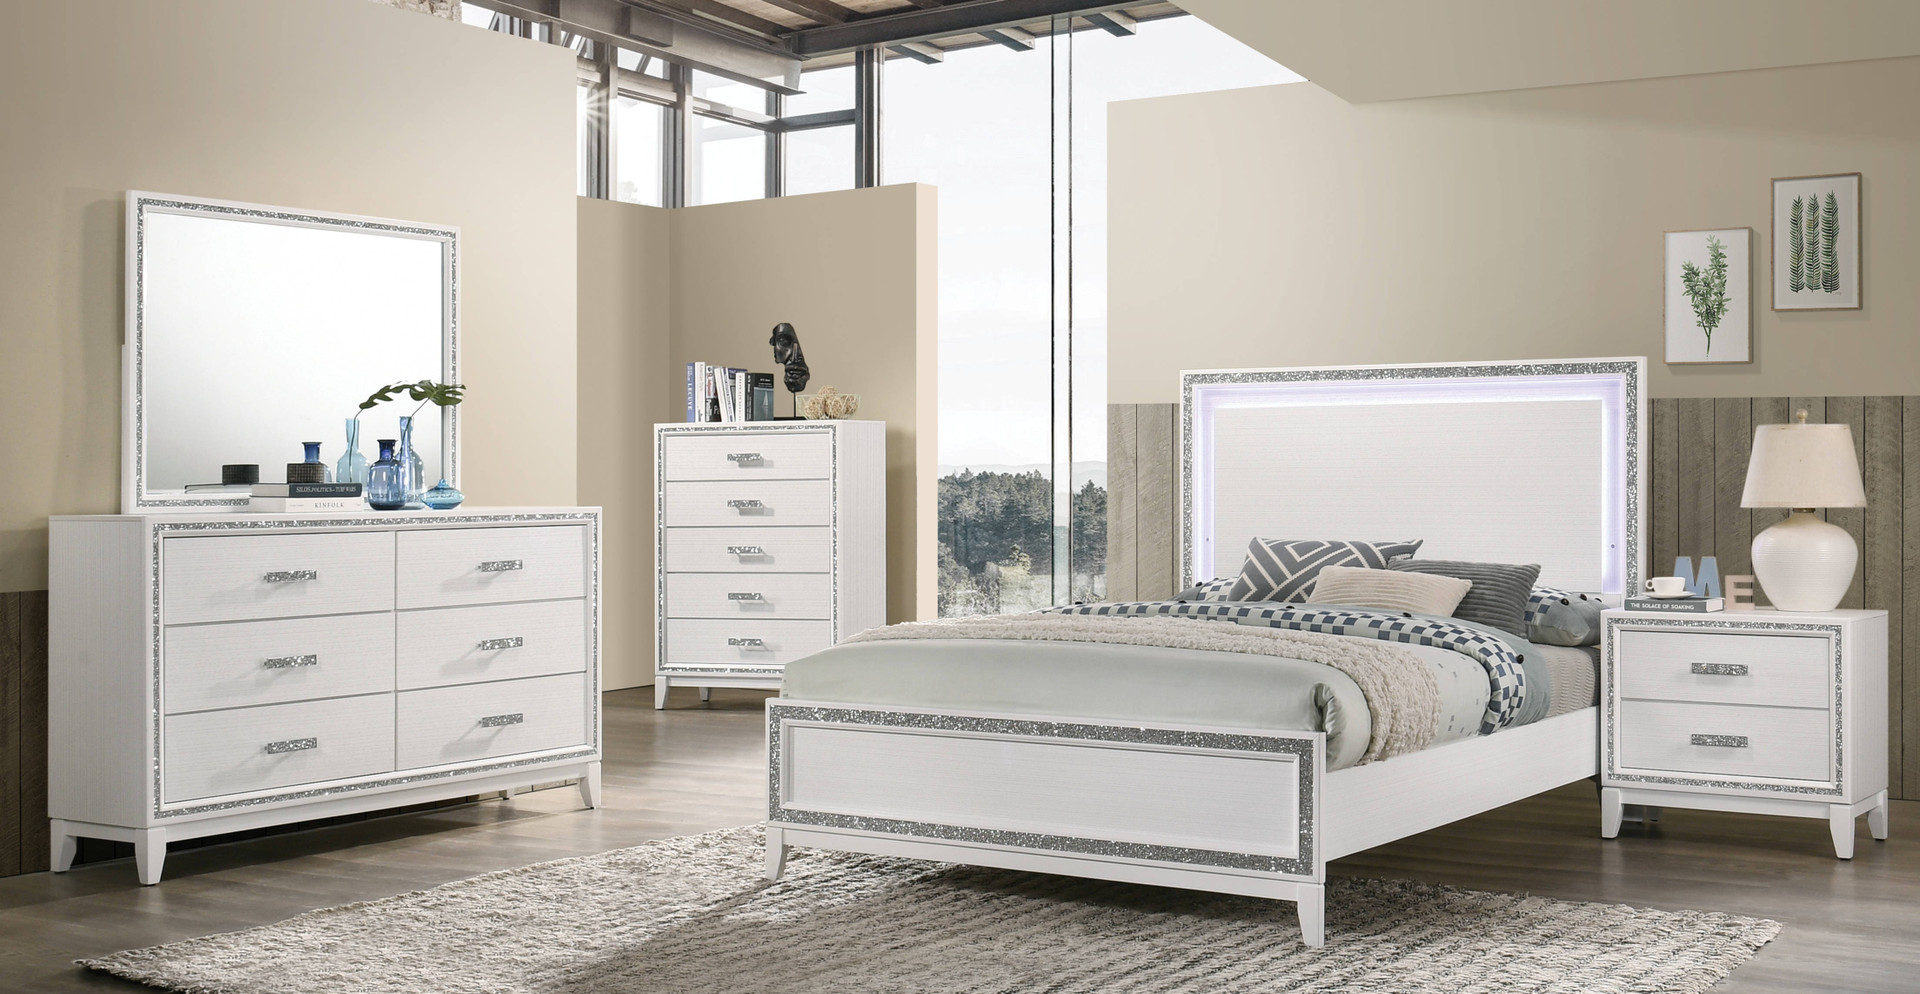 Bedrooms - Bedroom Sets - Page 8 - Miami Direct Furniture